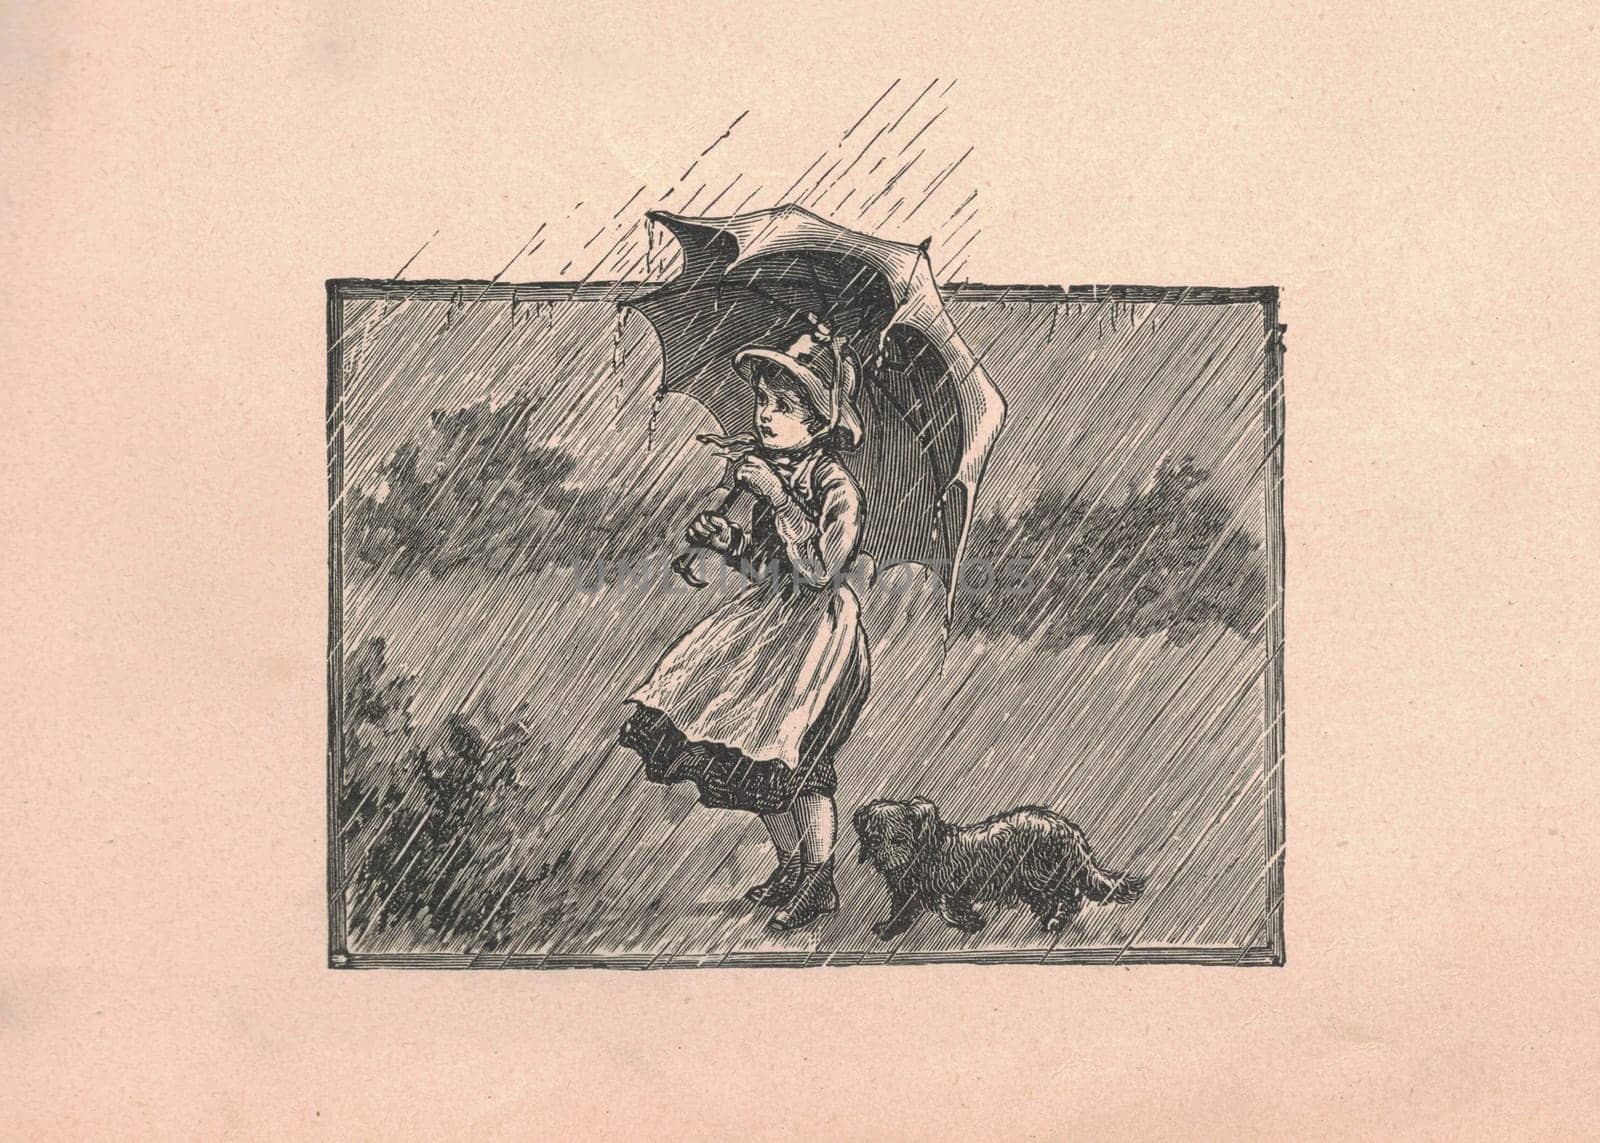 Black and white antique illustration shows a little girl holds umbrella in rainy time. Vintage drawing shows a little girl and dog in a rainy day. Old picture from fairy tale book. Storybook illustration published 1910. by roman_nerud